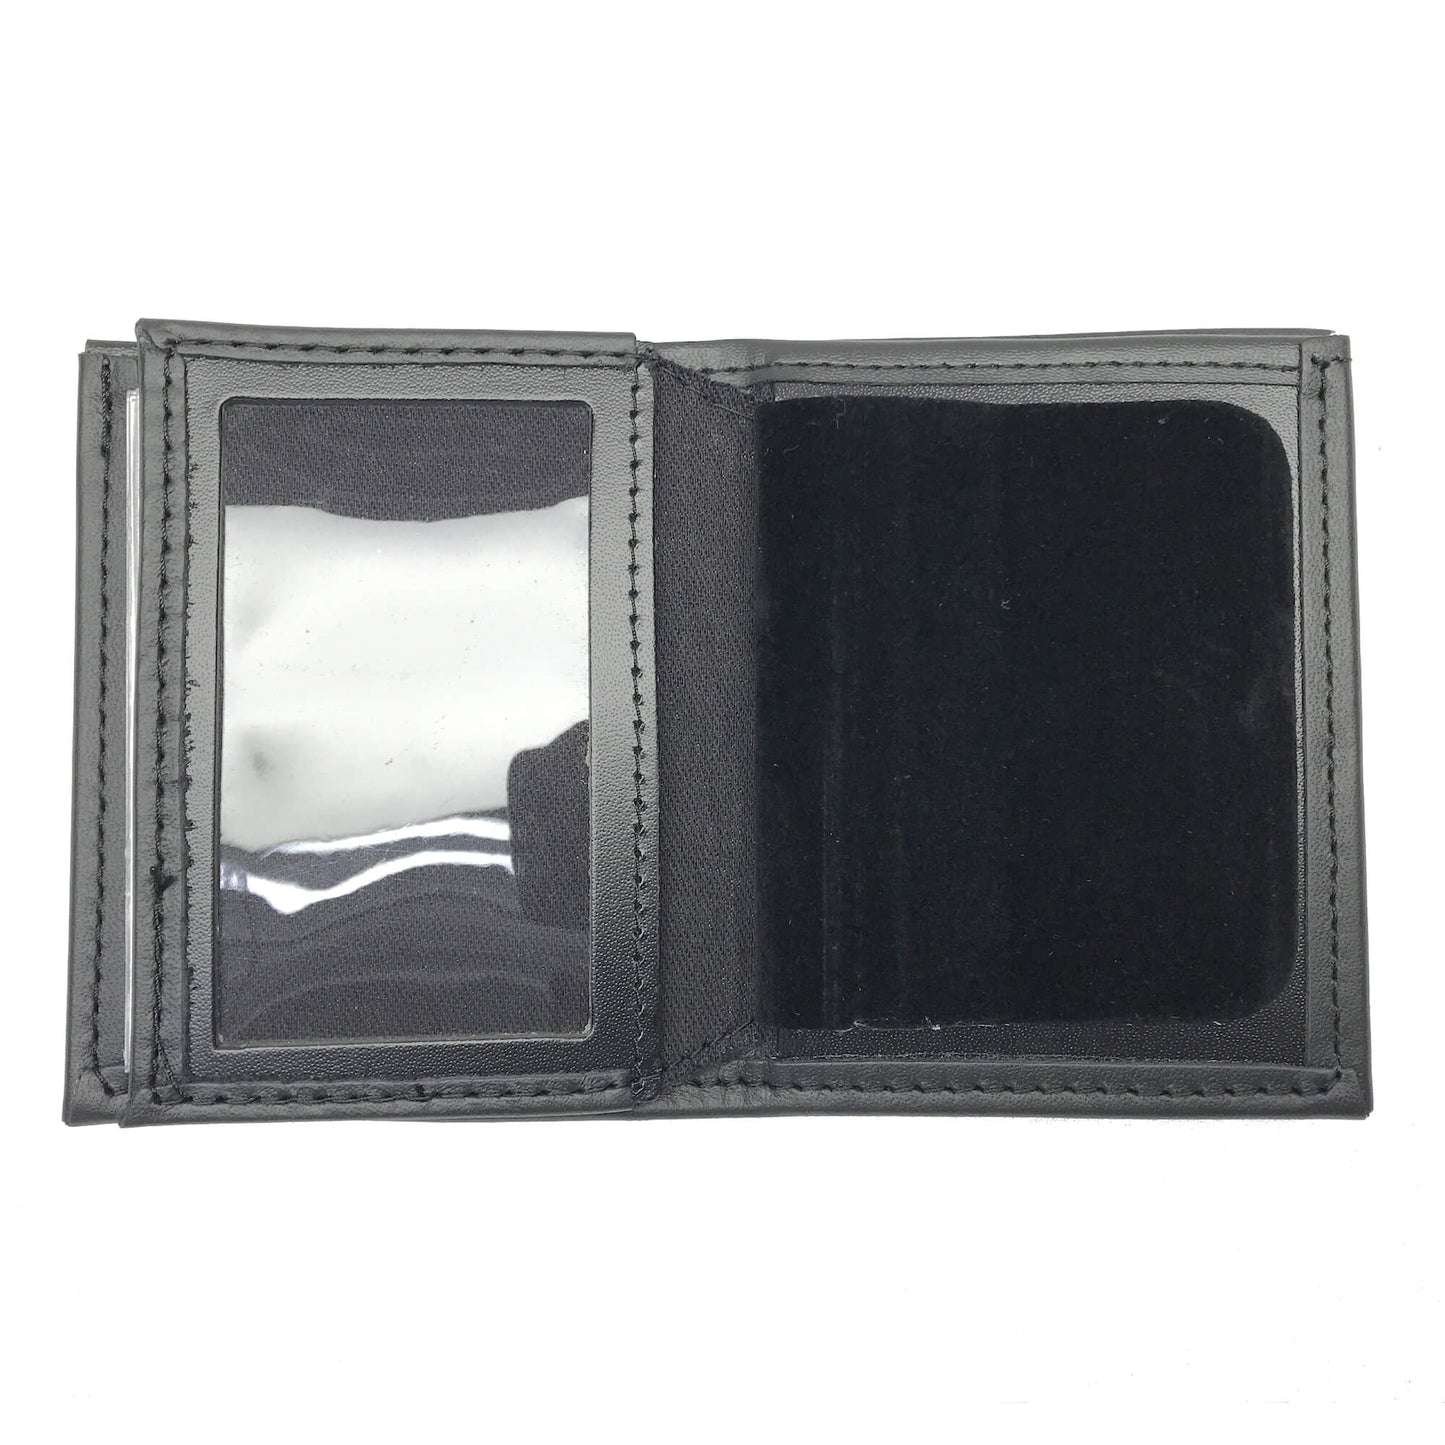 Miami Police Bifold Hidden Badge Wallet-Perfect Fit-911 Duty Gear USA